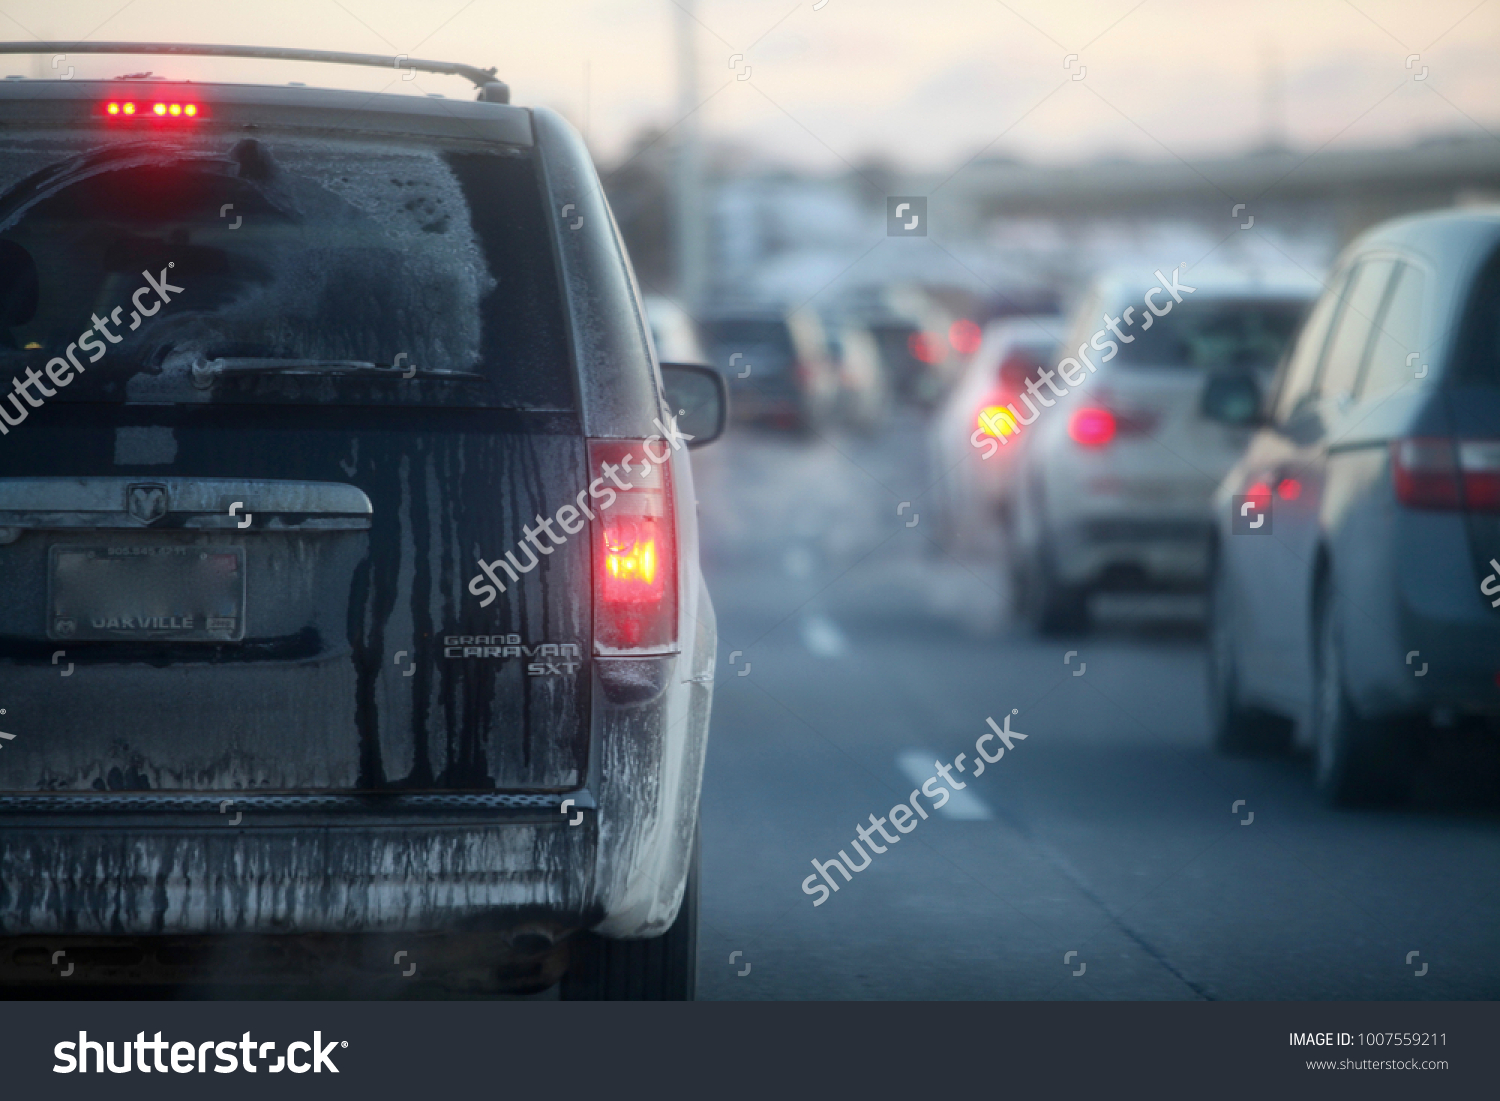 Jan 4th, 2018-Oakville, Canada: Dodge caravan waiting in traffic on the 401 highway during rush hour #1007559211